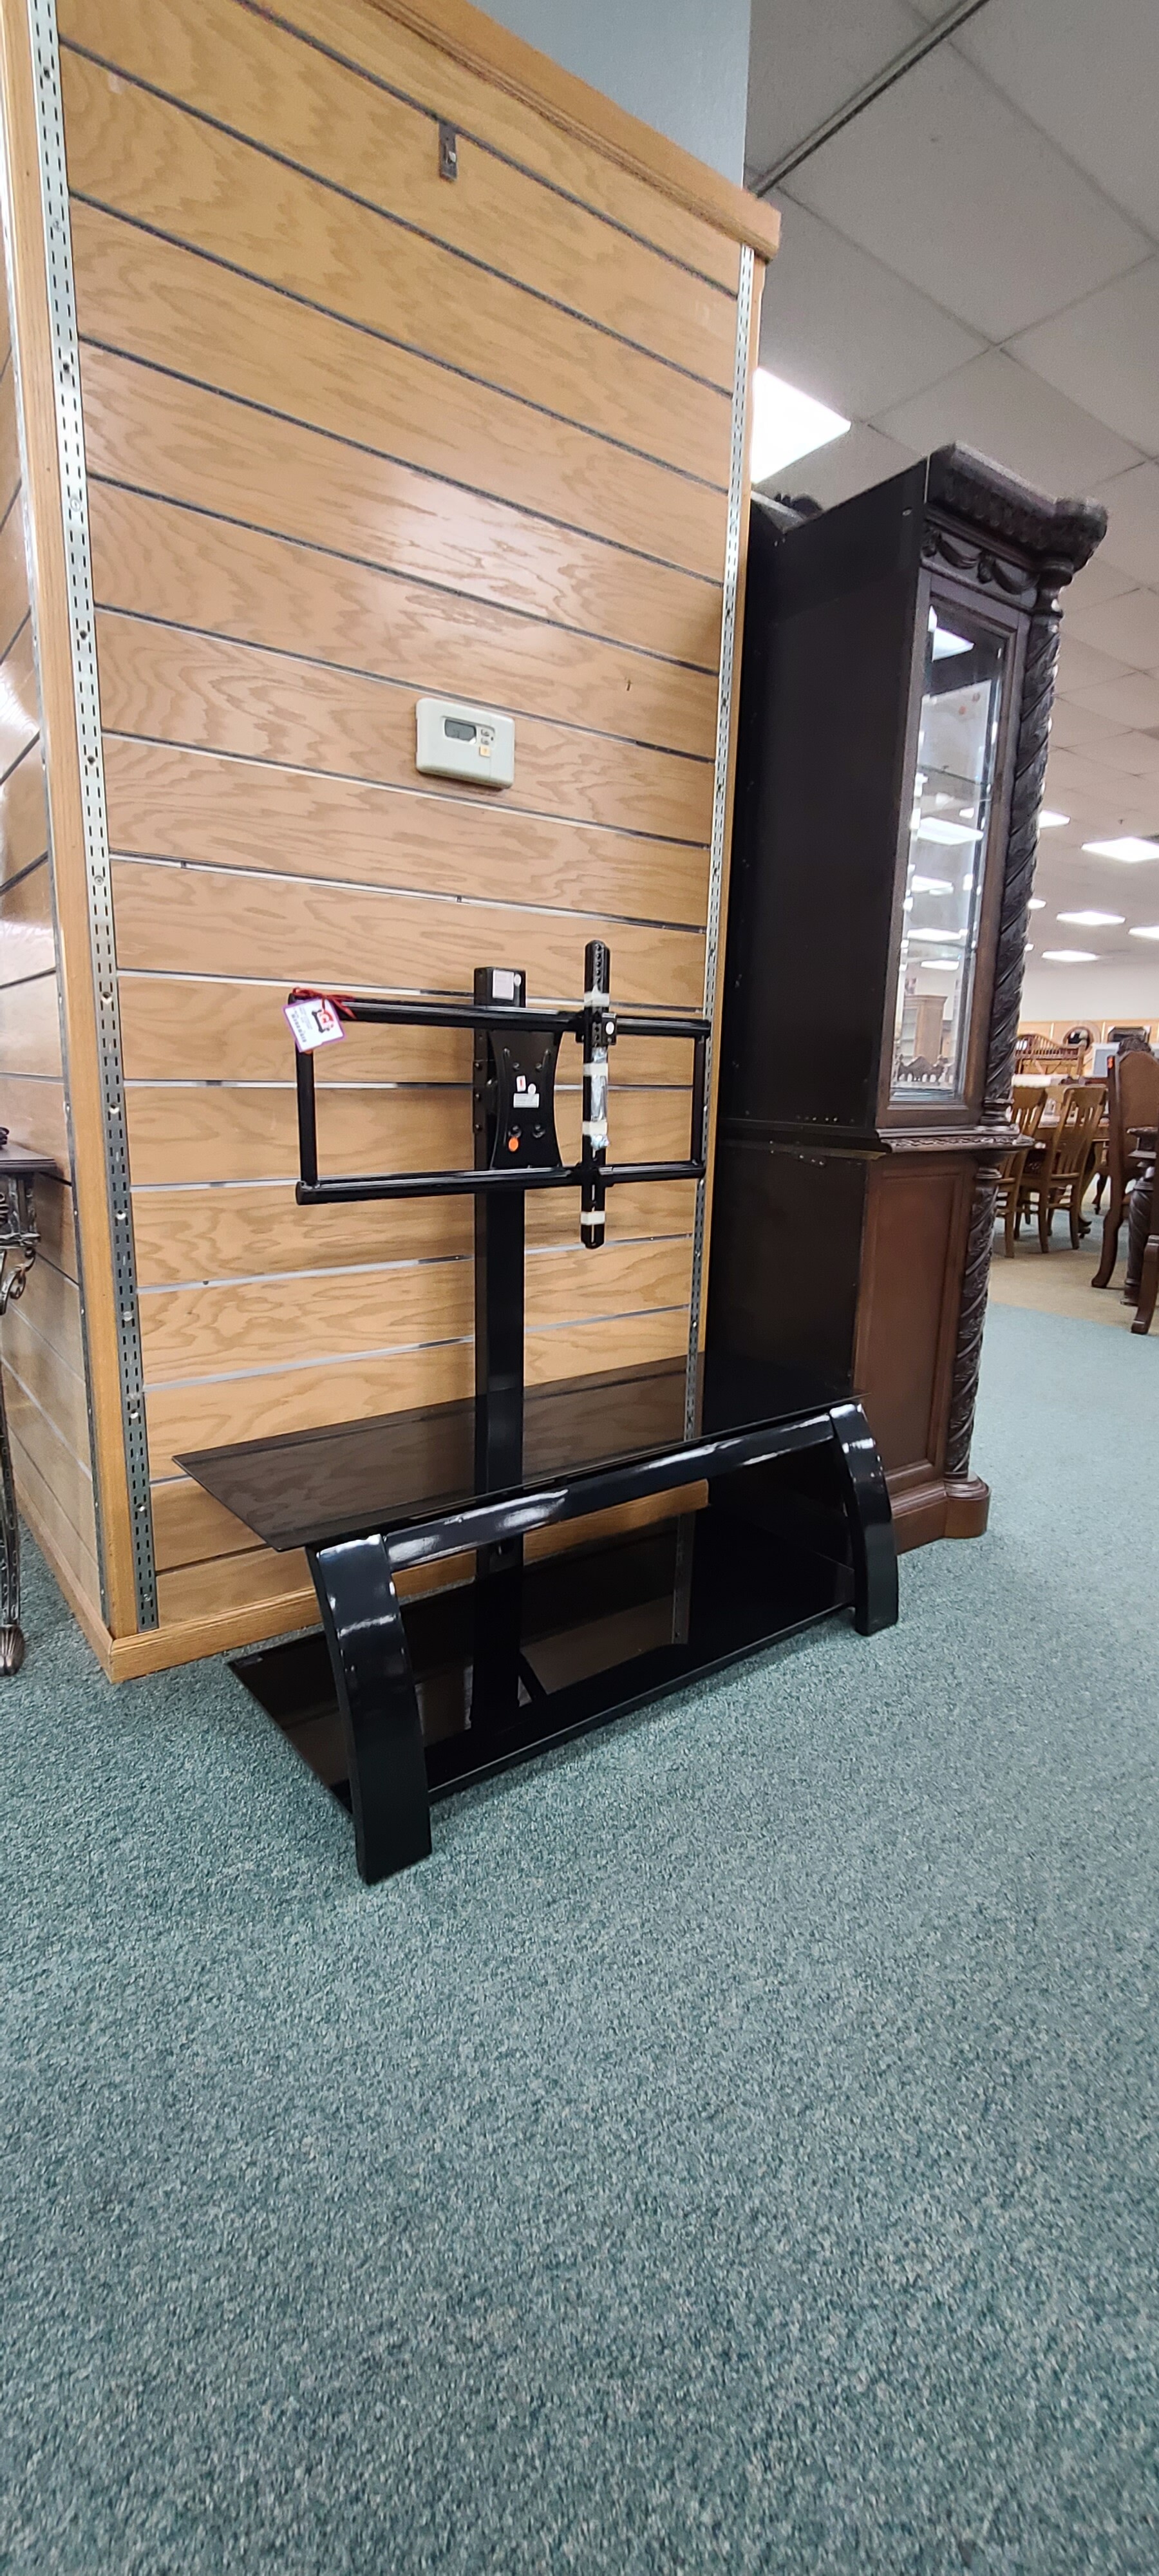 TV STAND
TV CONSOLE
PLEASE CALL THE STORE FOR DETAILS.